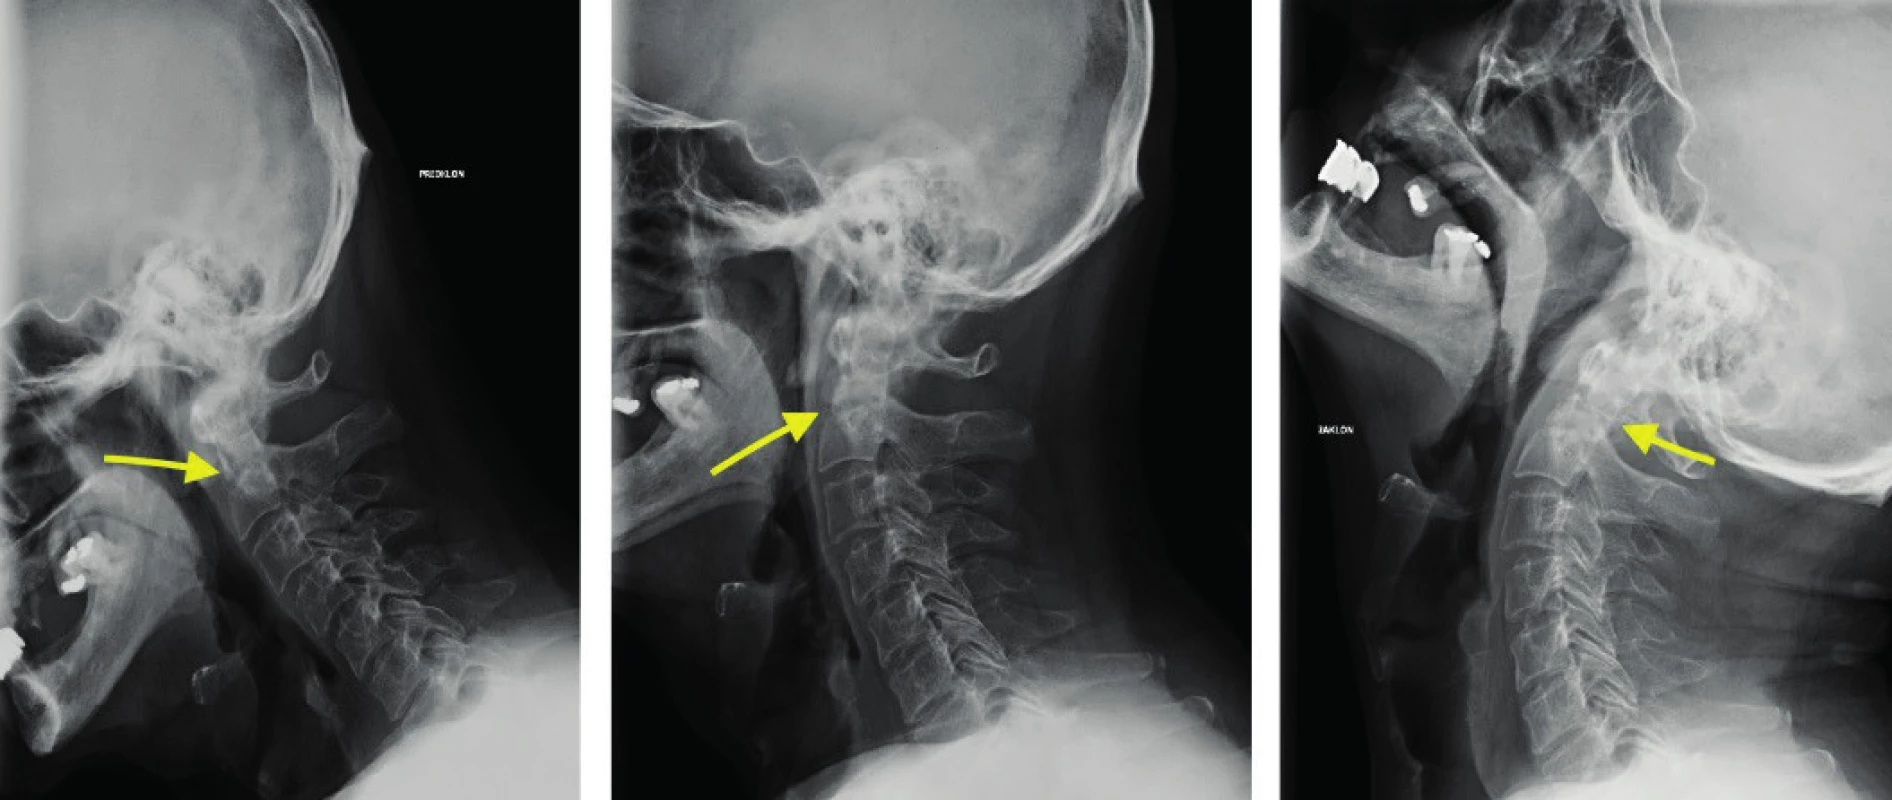 Functional x-ray images of cervical spine acquired 6 months after the odontoid fracture. The arrow shows a still present fracture line in the C2 vertebrae area. However, pathological shift of axis of the affected spinal section is not obvious in the forward and backward bend 